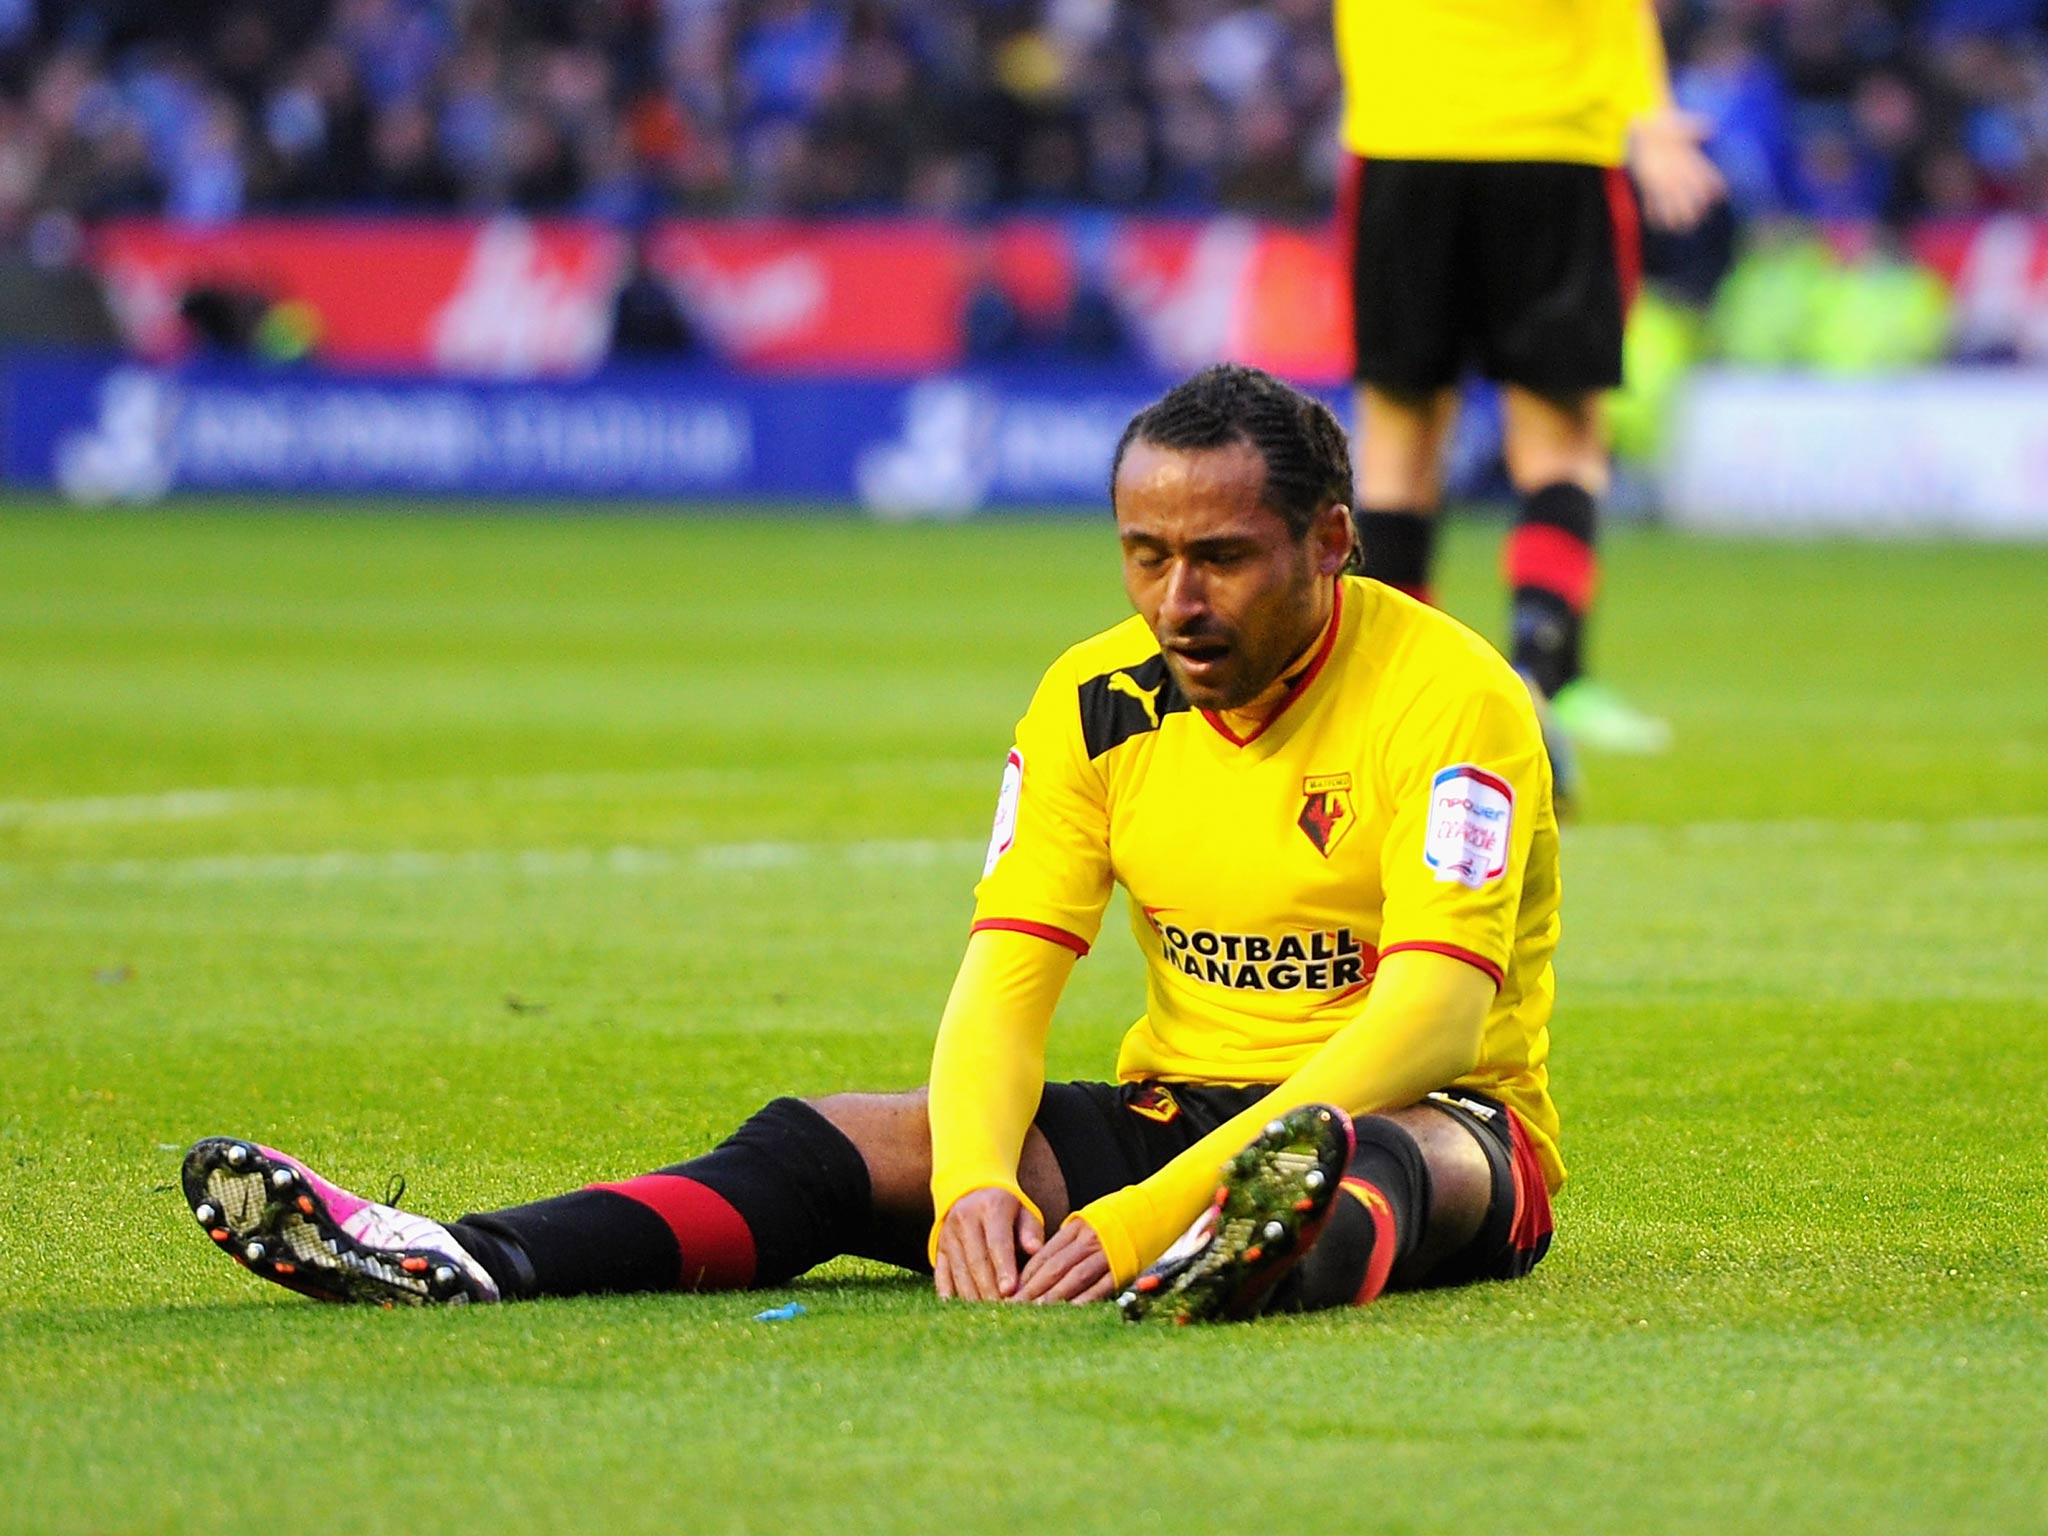 Ikechi Anya of Watford reacts after missing a goal scoring chance during the npower Championship Play Off Semi Final First Leg match between Leicester City and Watford